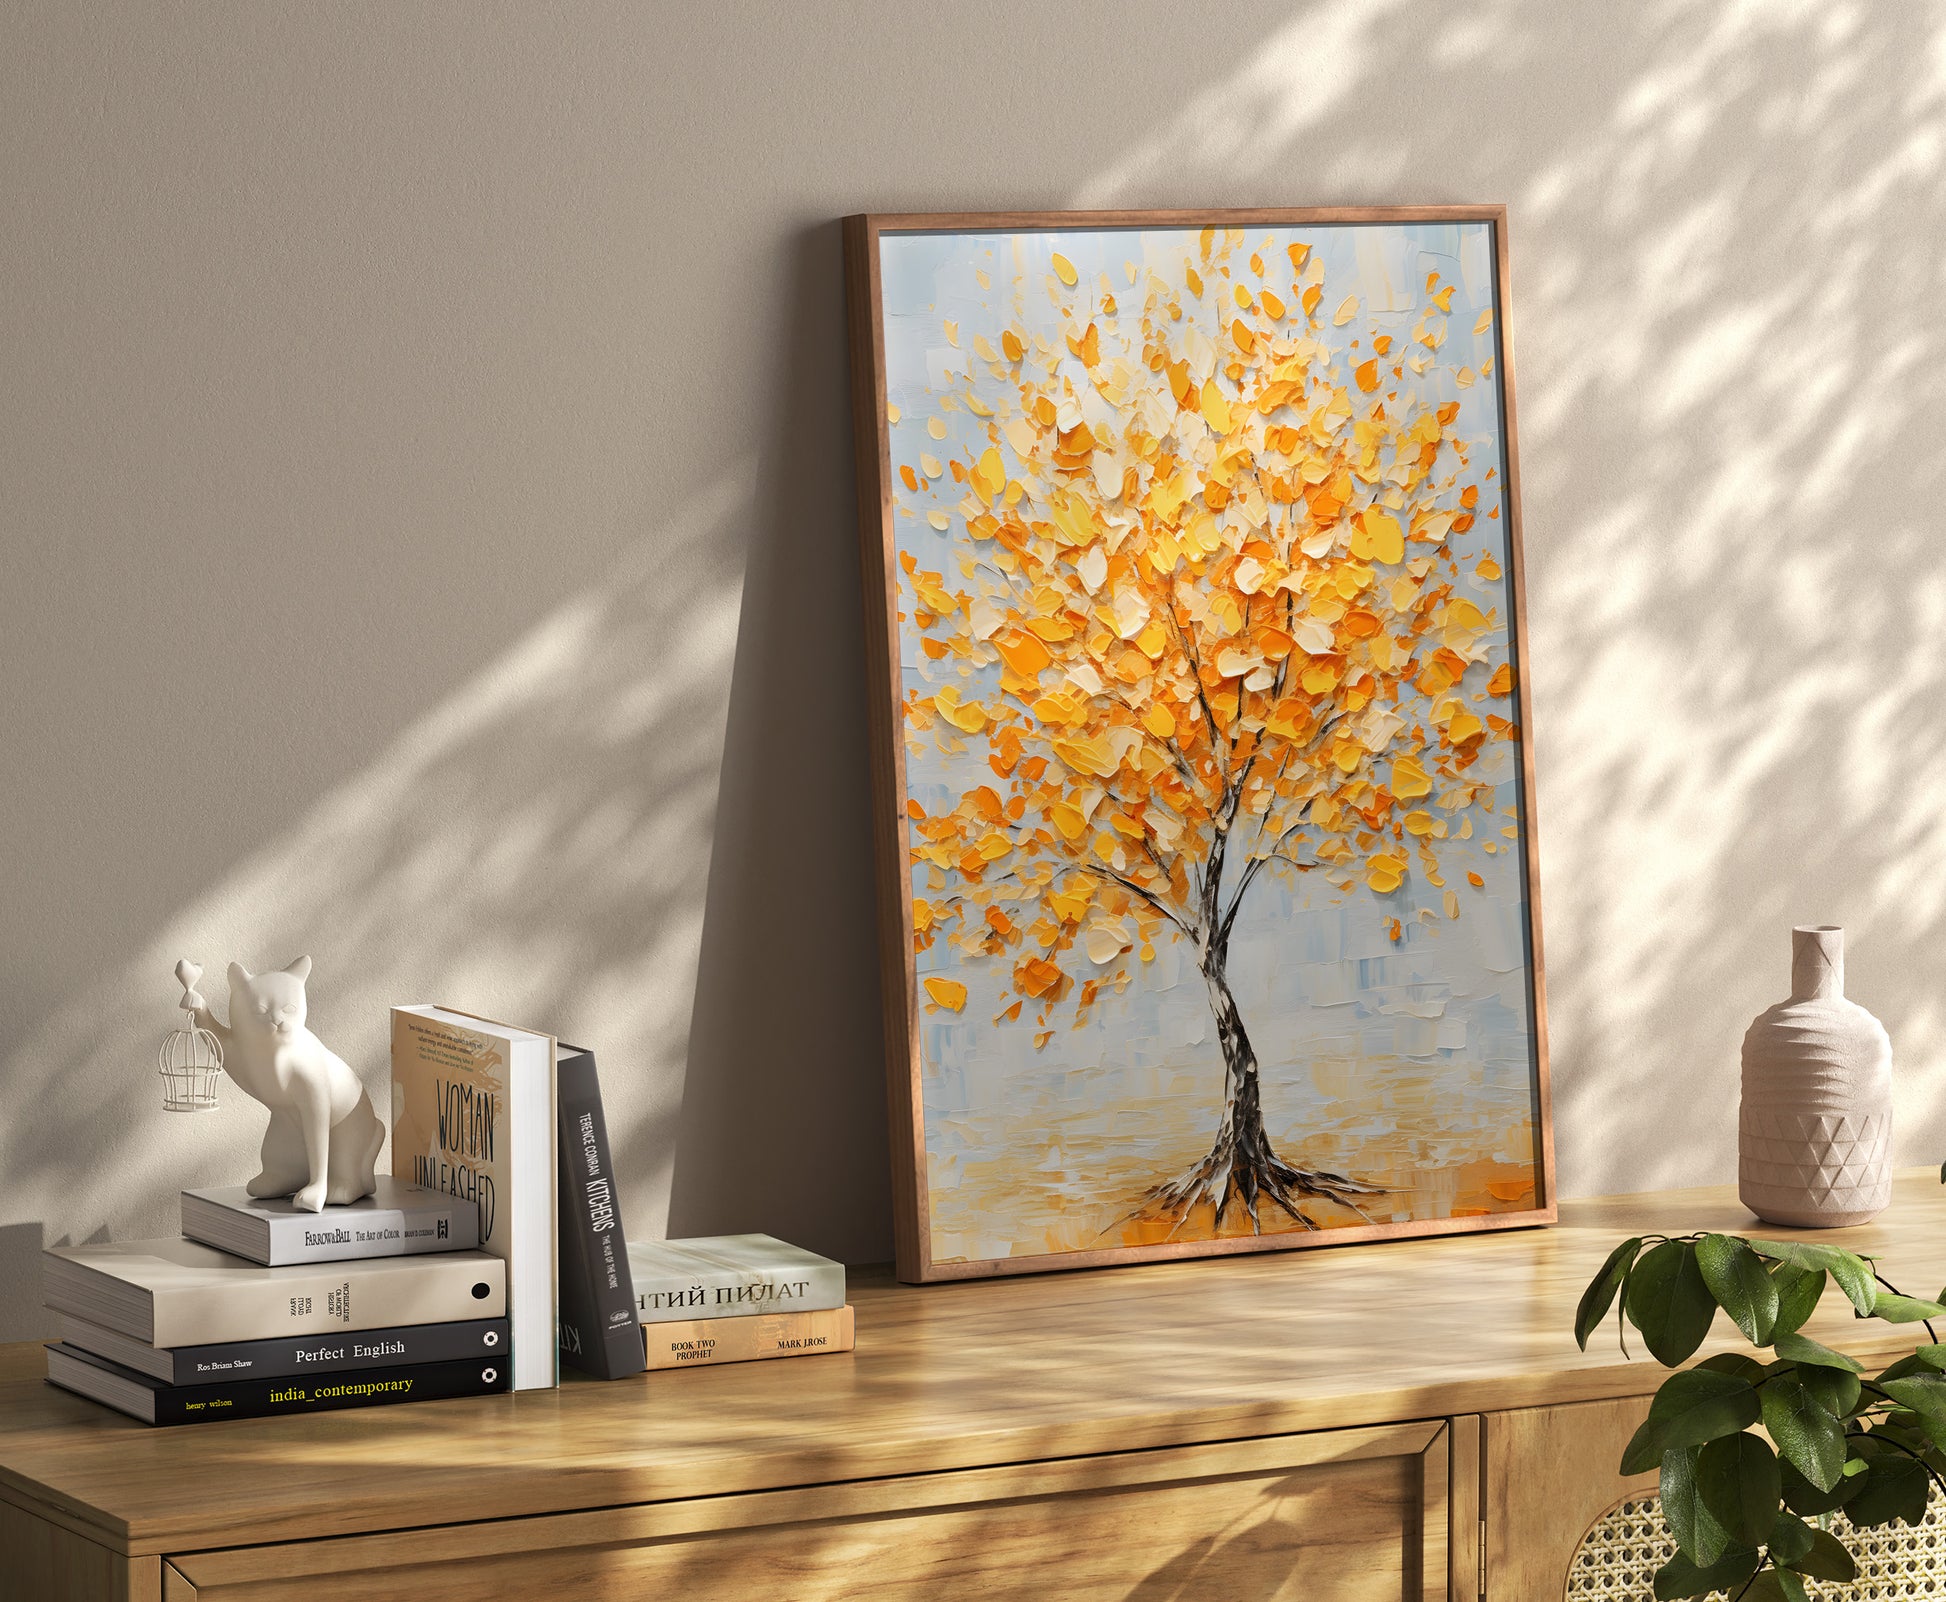 A framed autumn tree painting leaning against a wall beside books and decorative items on a sideboard.